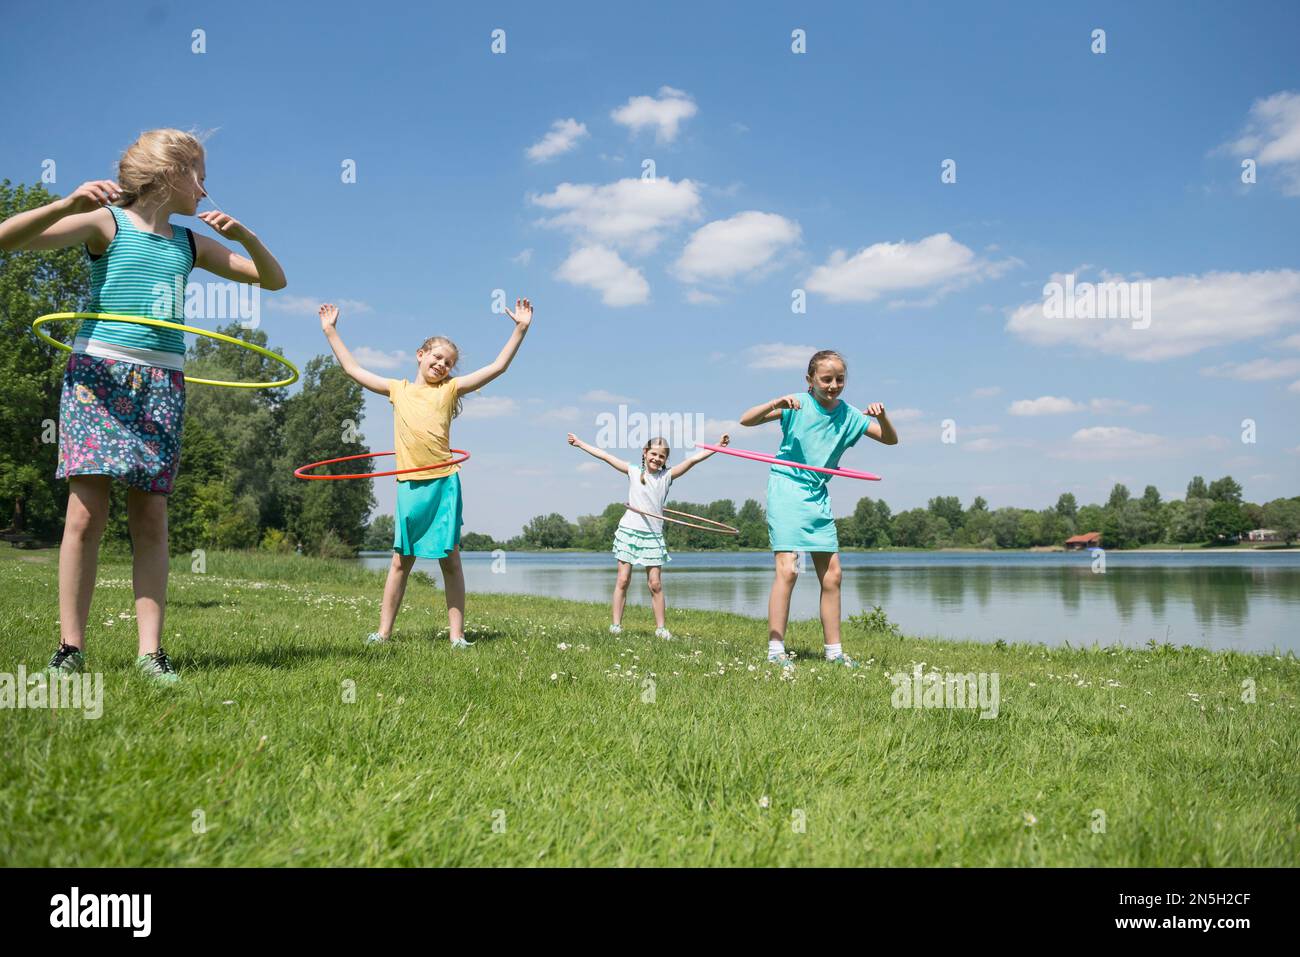 Group of friends spinning plastic hoops at lakeside, Munich, Bavaria, Germany Stock Photo